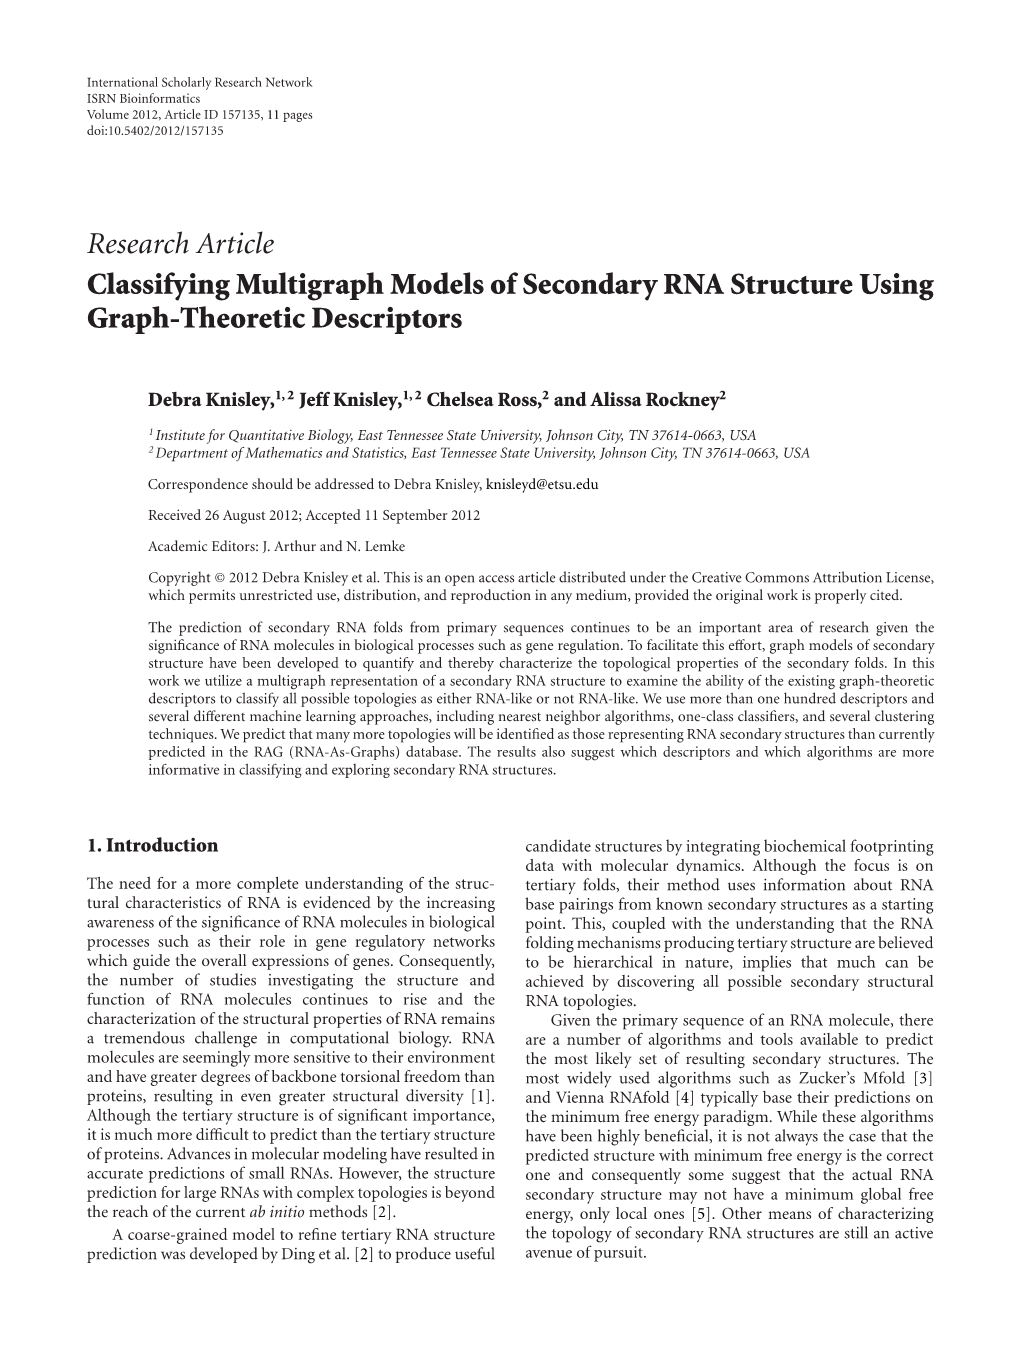 Classifying Multigraph Models of Secondary RNA Structure Using Graph-Theoretic Descriptors